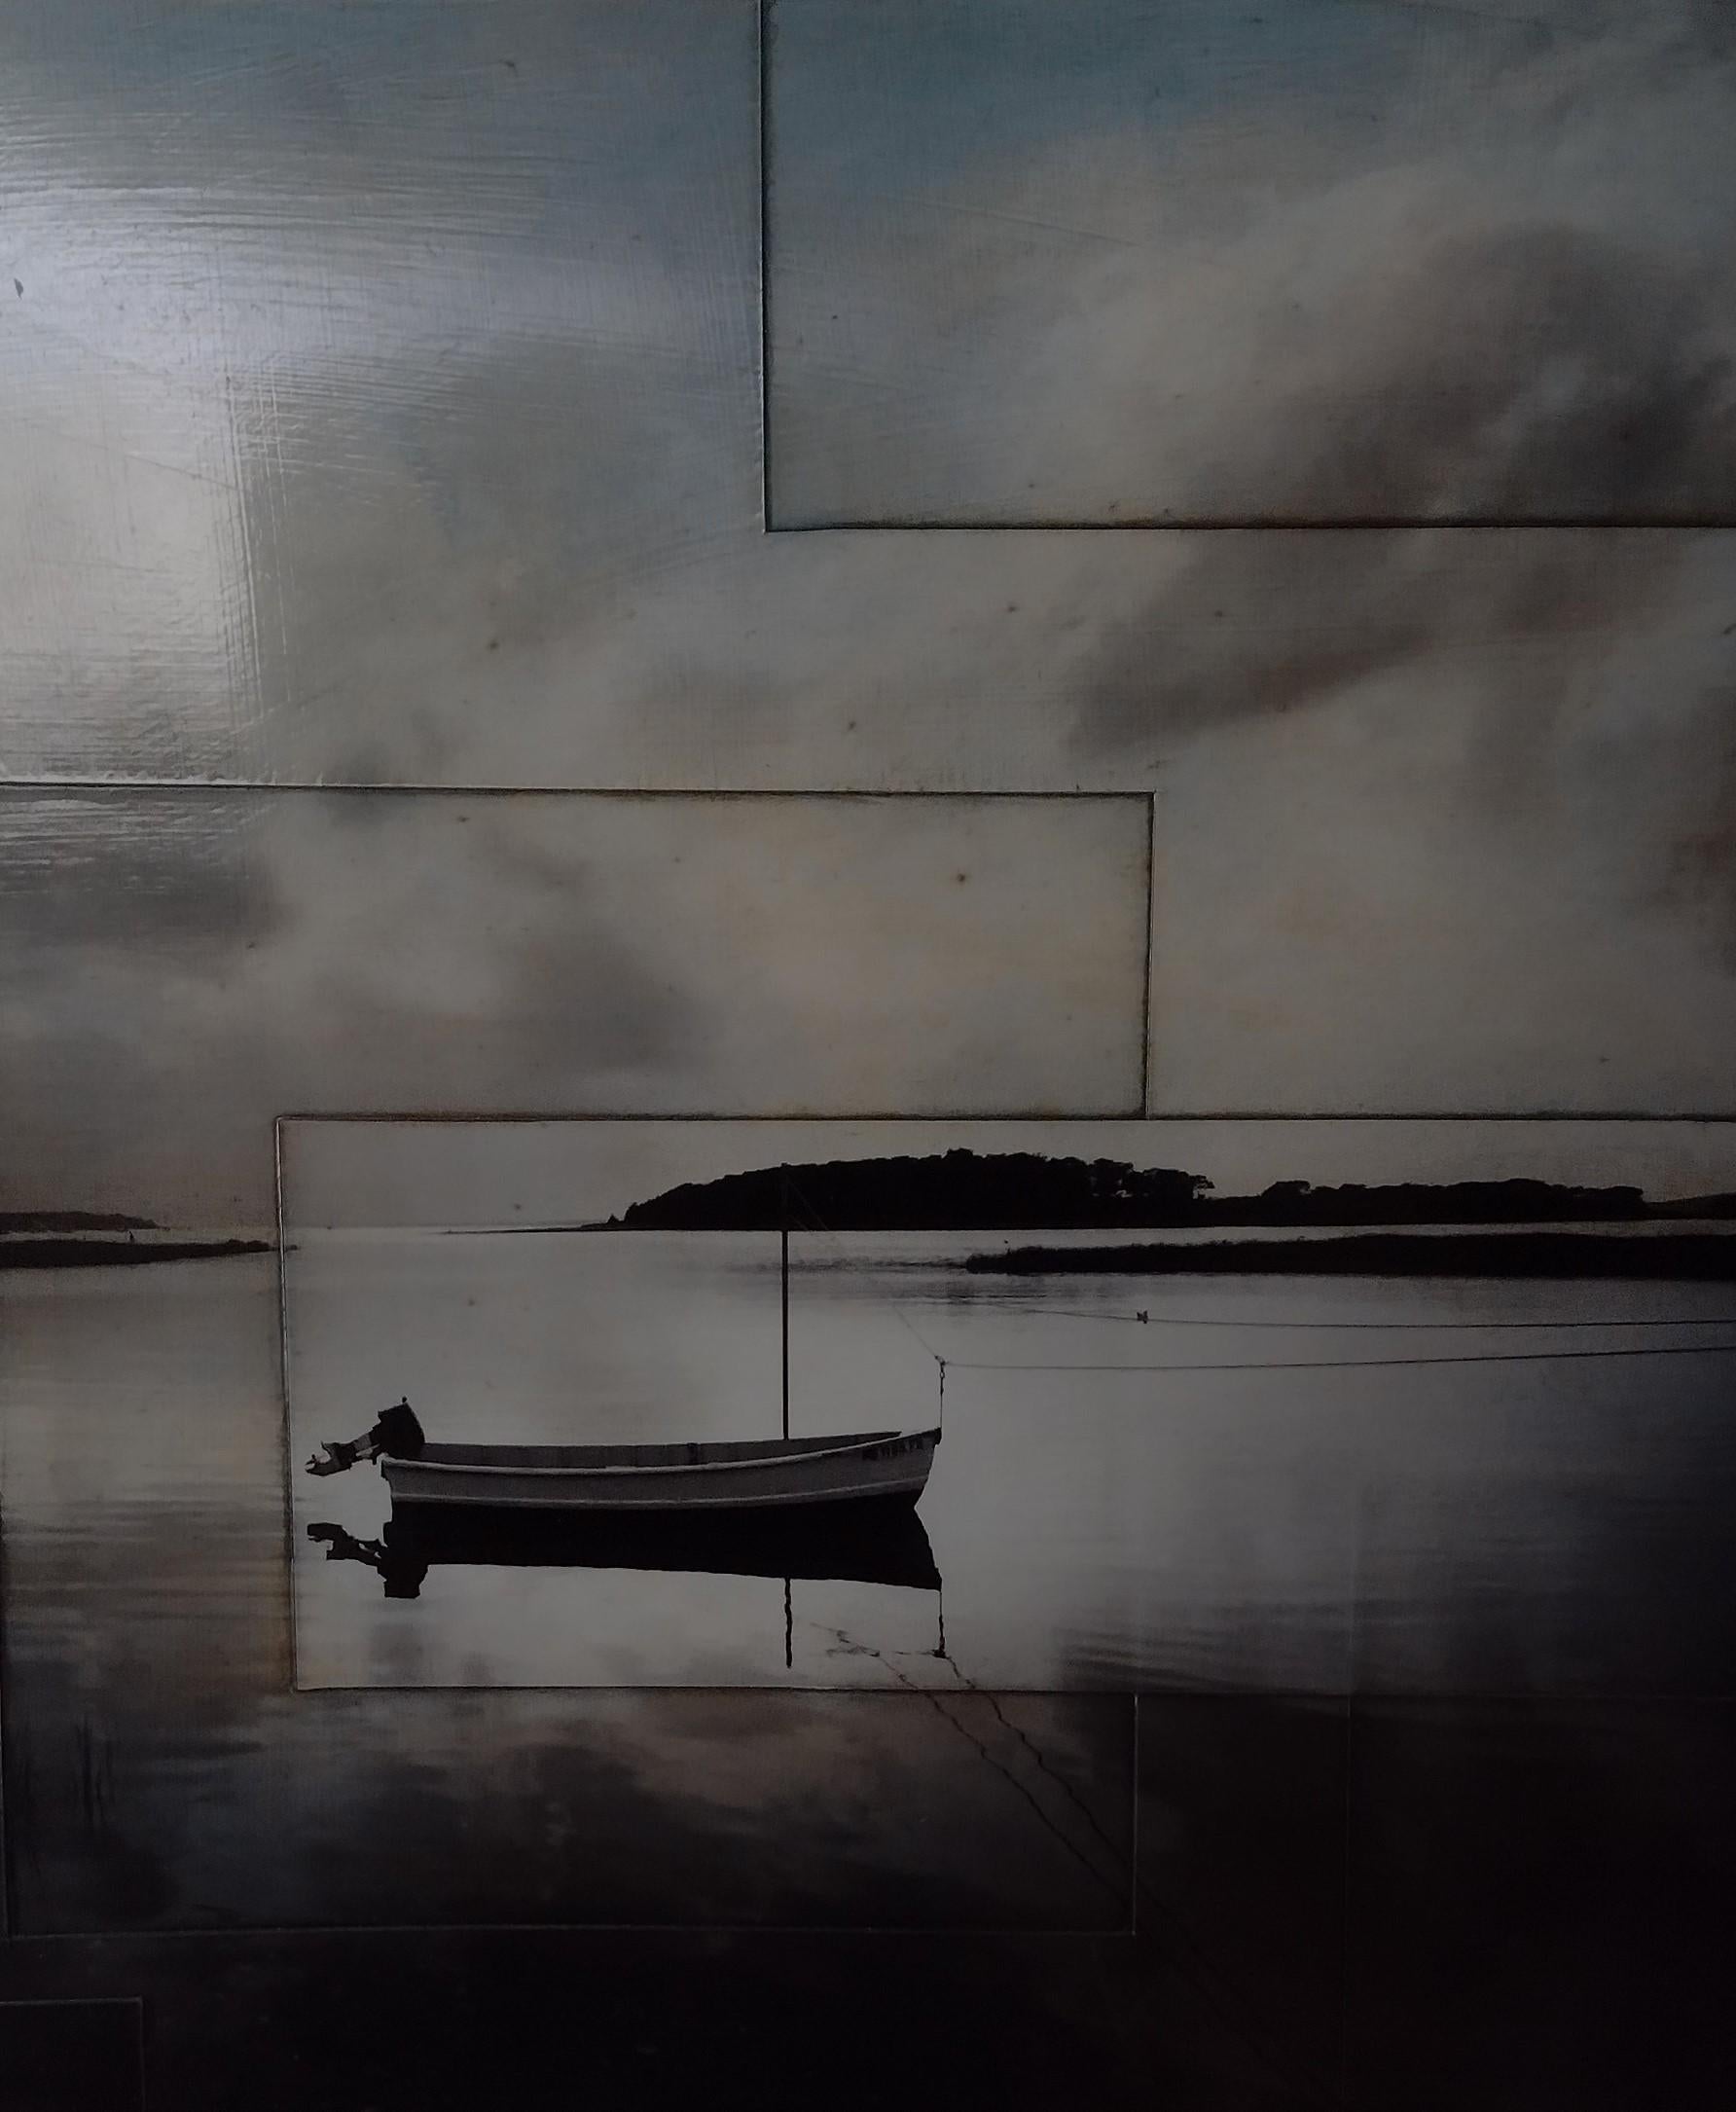 Boat on Lake - Original Photography Collage on Paper - Black Landscape Photograph by Pezhman 